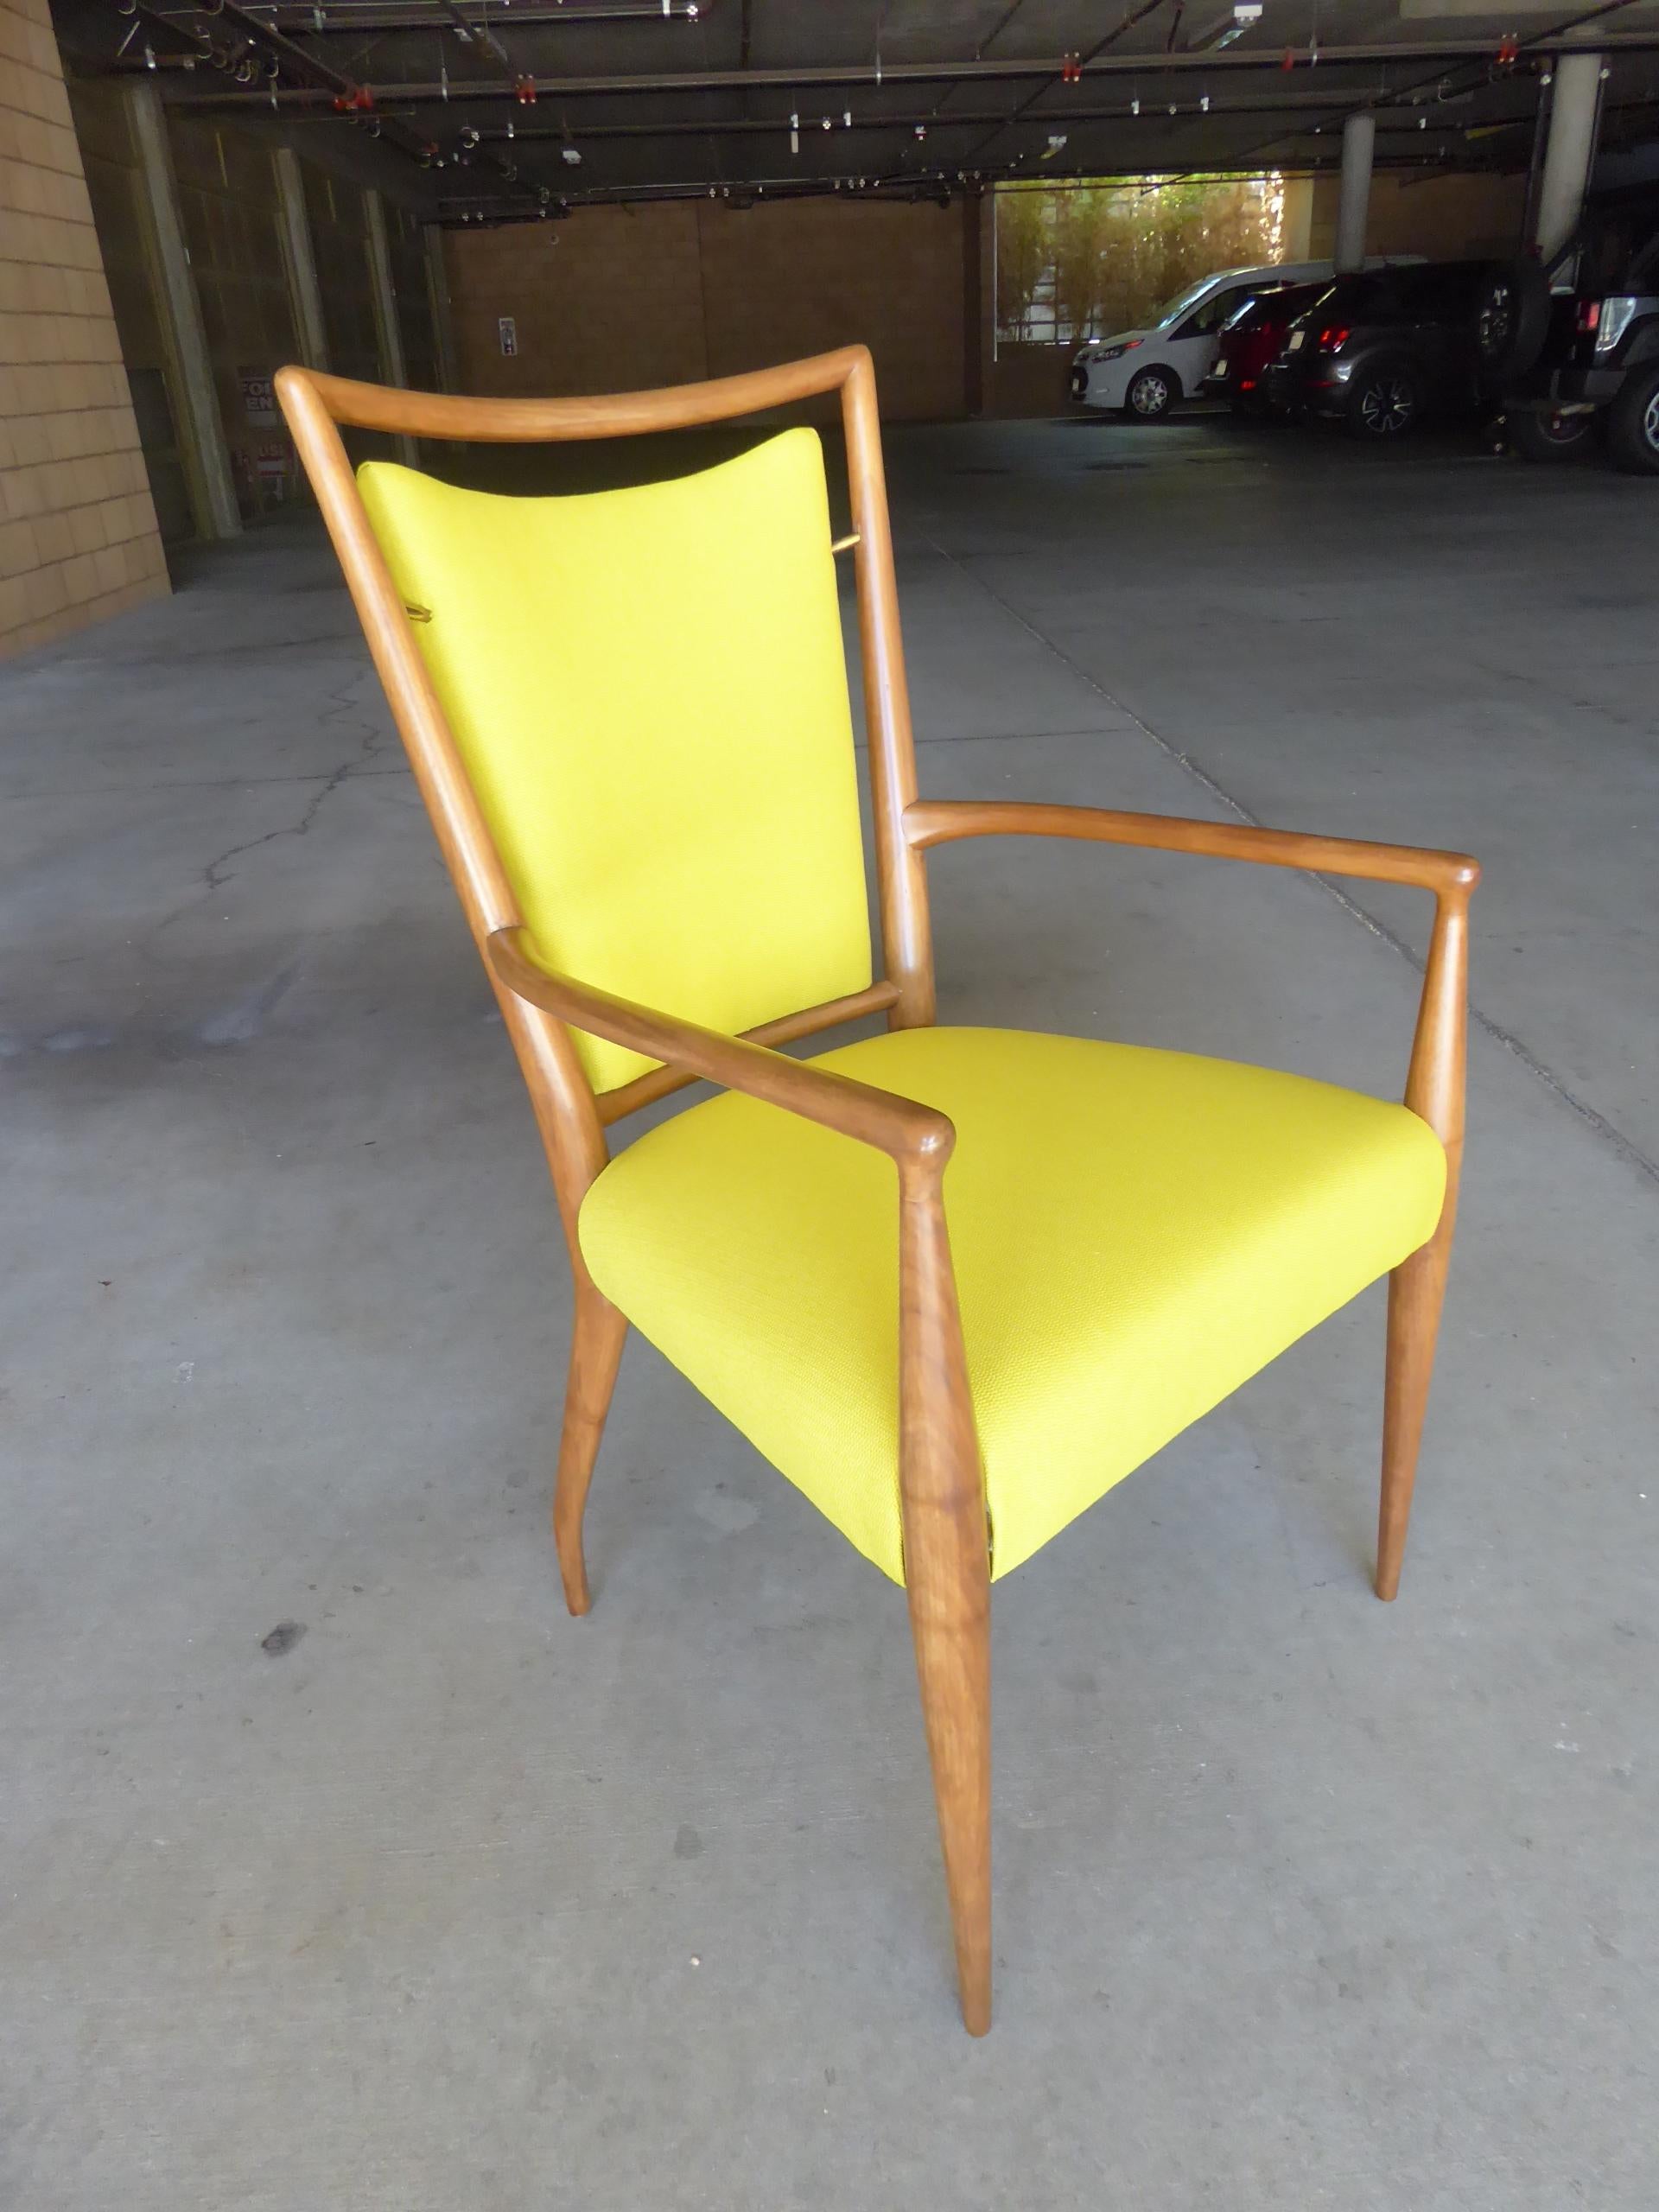 A bleached walnut armchair designed by J. Stuart Clingman for Widdicomb Furniture in the 1950s. The chair back is supported by brass hardware that holds it in place. Newly reupholstered.